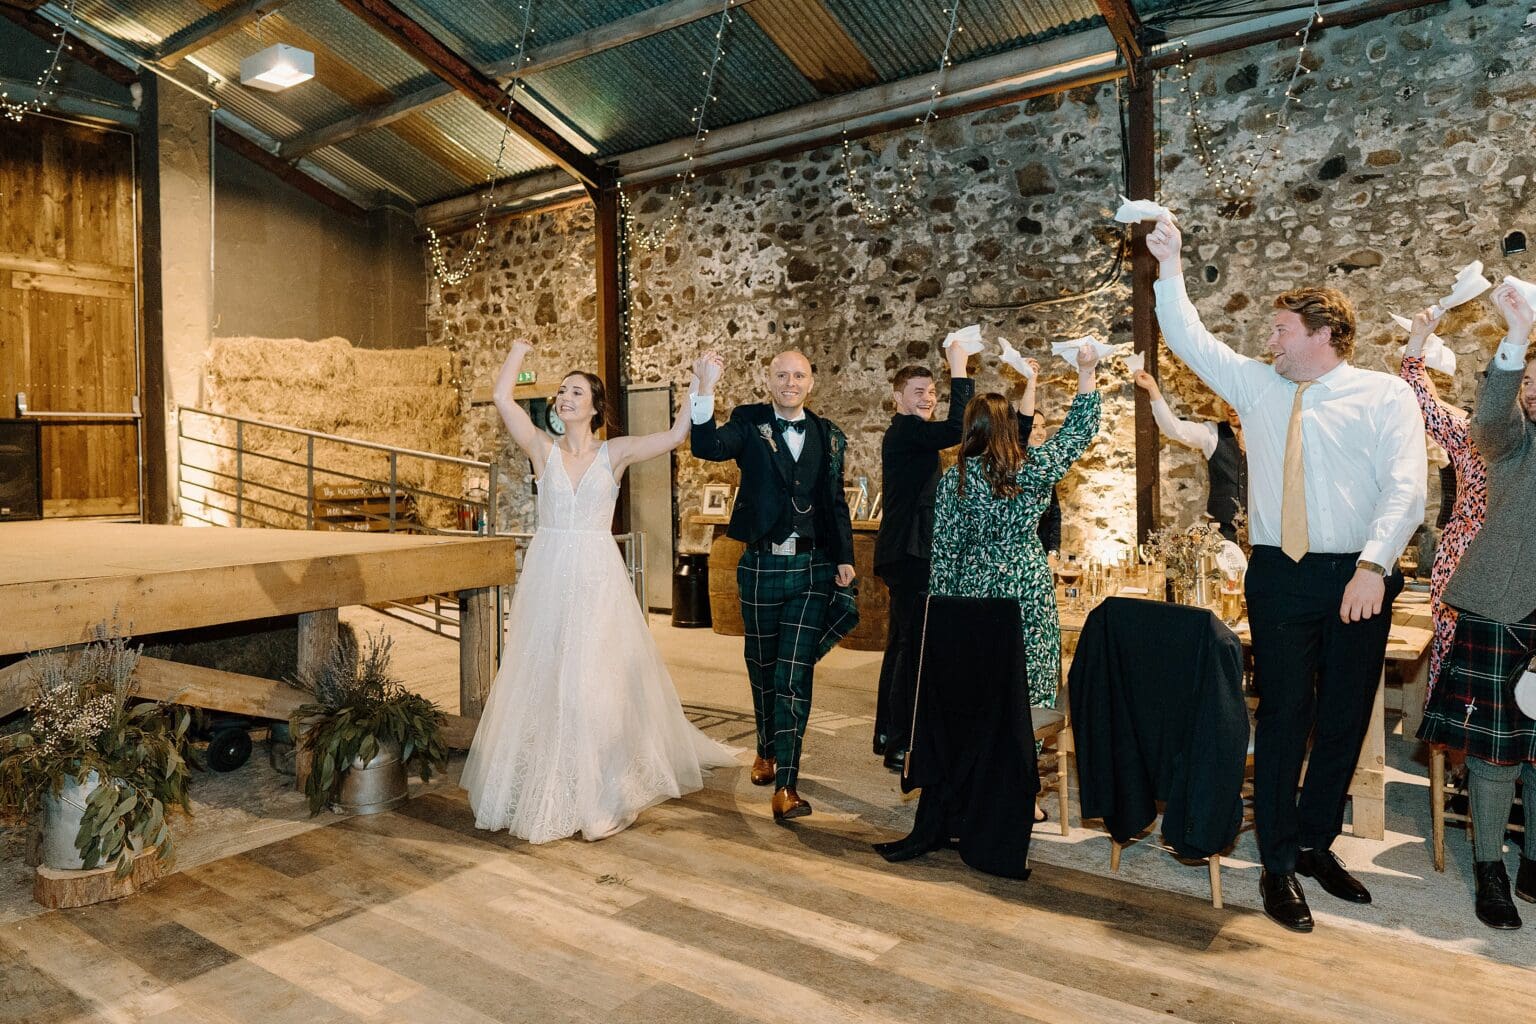 in a stone walled room with festoon lighting and hay bales in the background guests stand and wave white napkins as the bride and groom arrive for their wedding dinner at their barn wedding venue near glasgow scotland